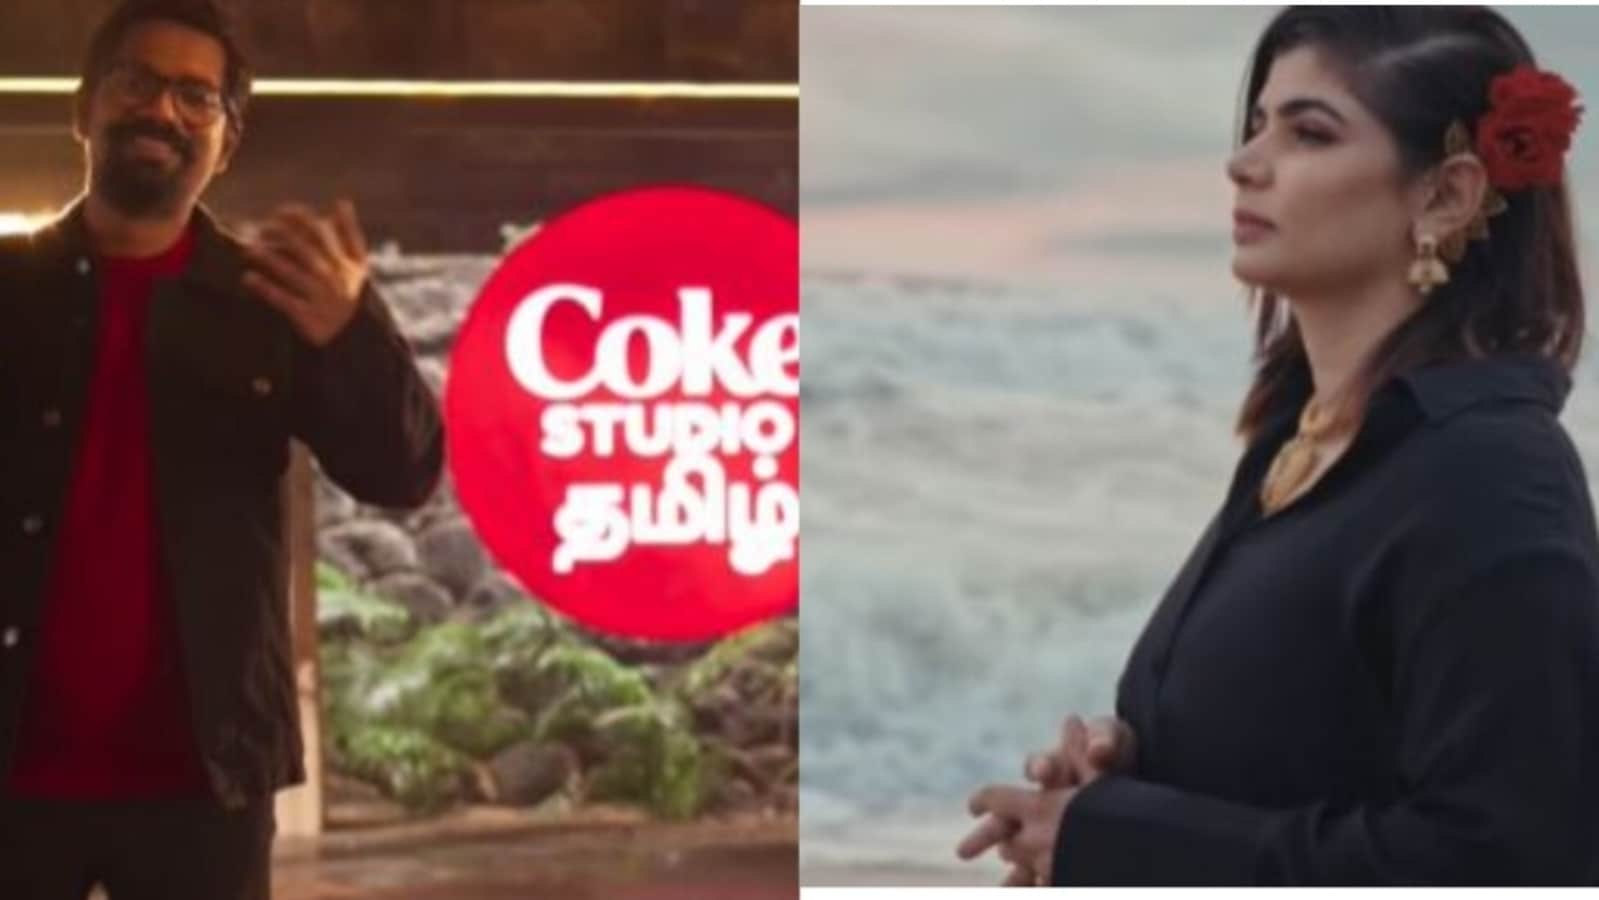 Coke Studio India launches its Tamil edition, releases promo; Chinmayi Sripaada reveals she’s part of it